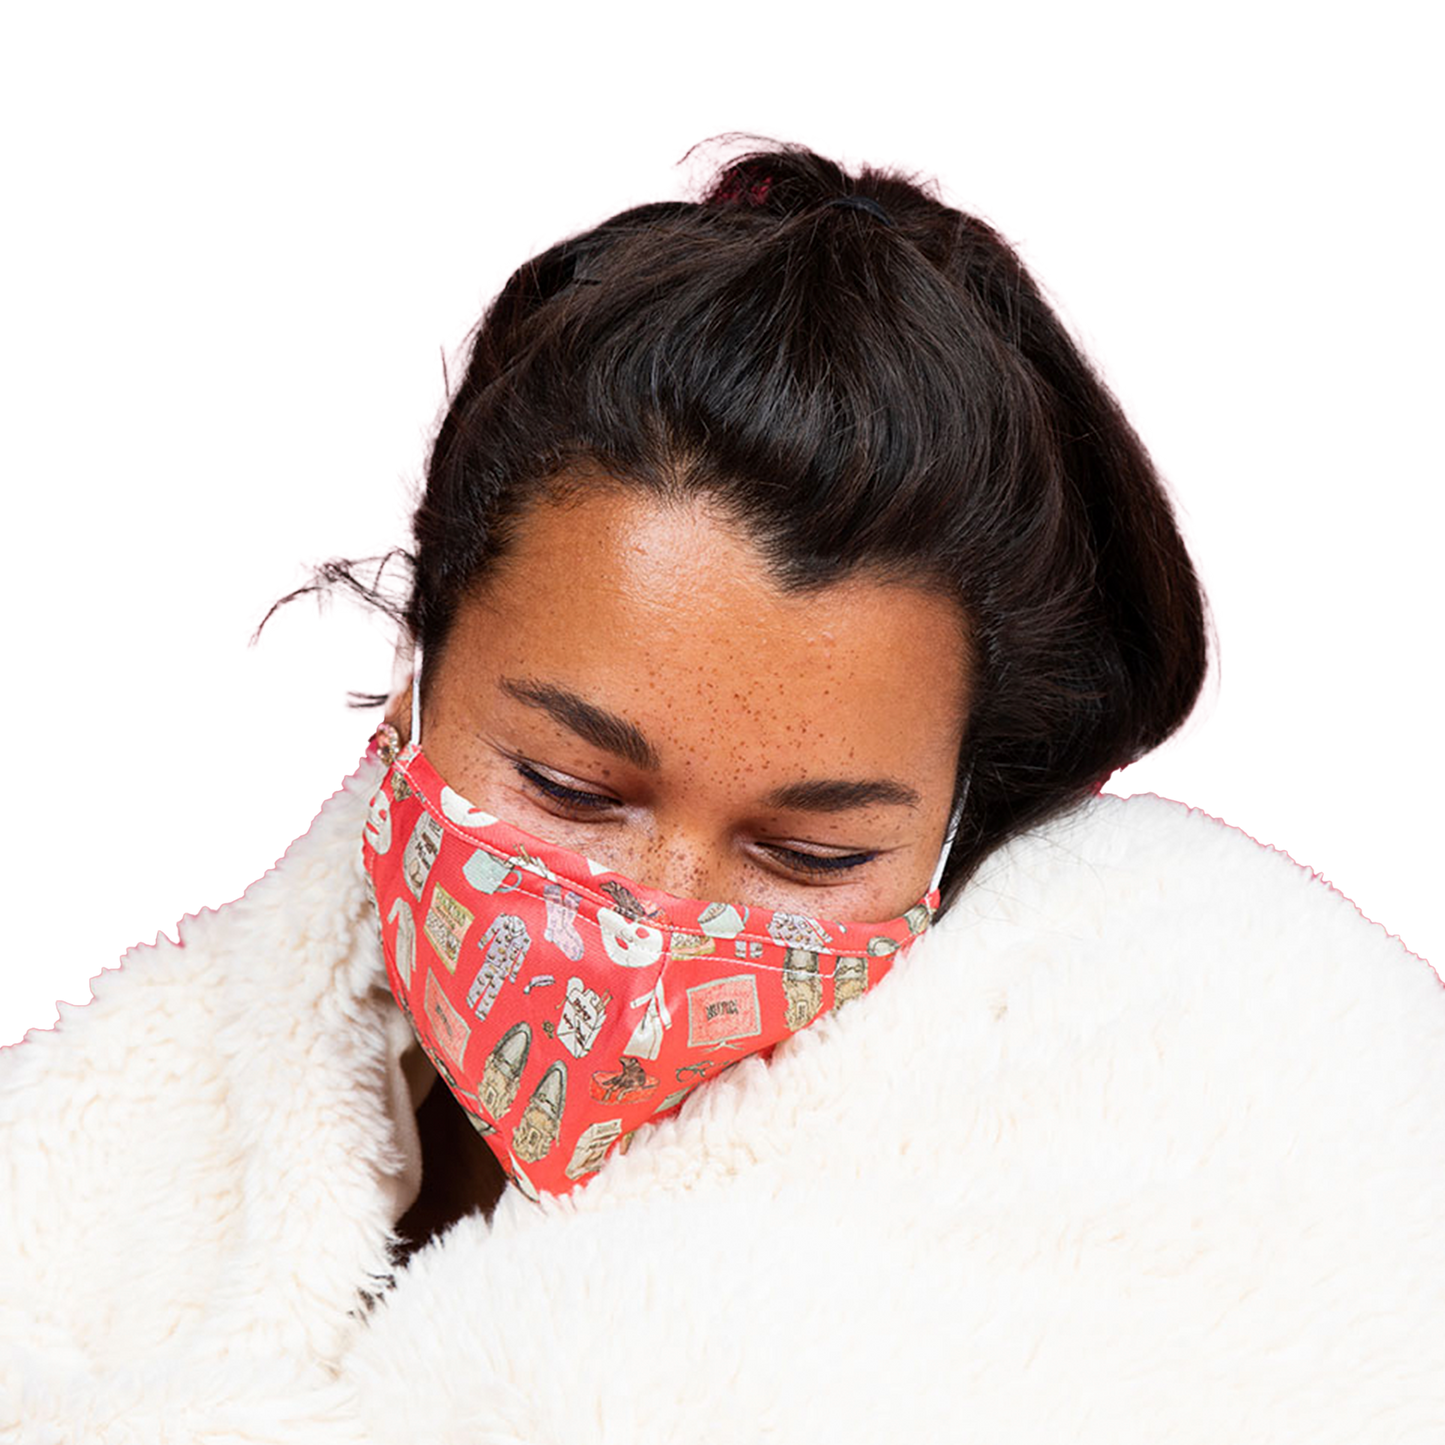 Netflix and Chill Mask 2.0 (Nantucket Red)